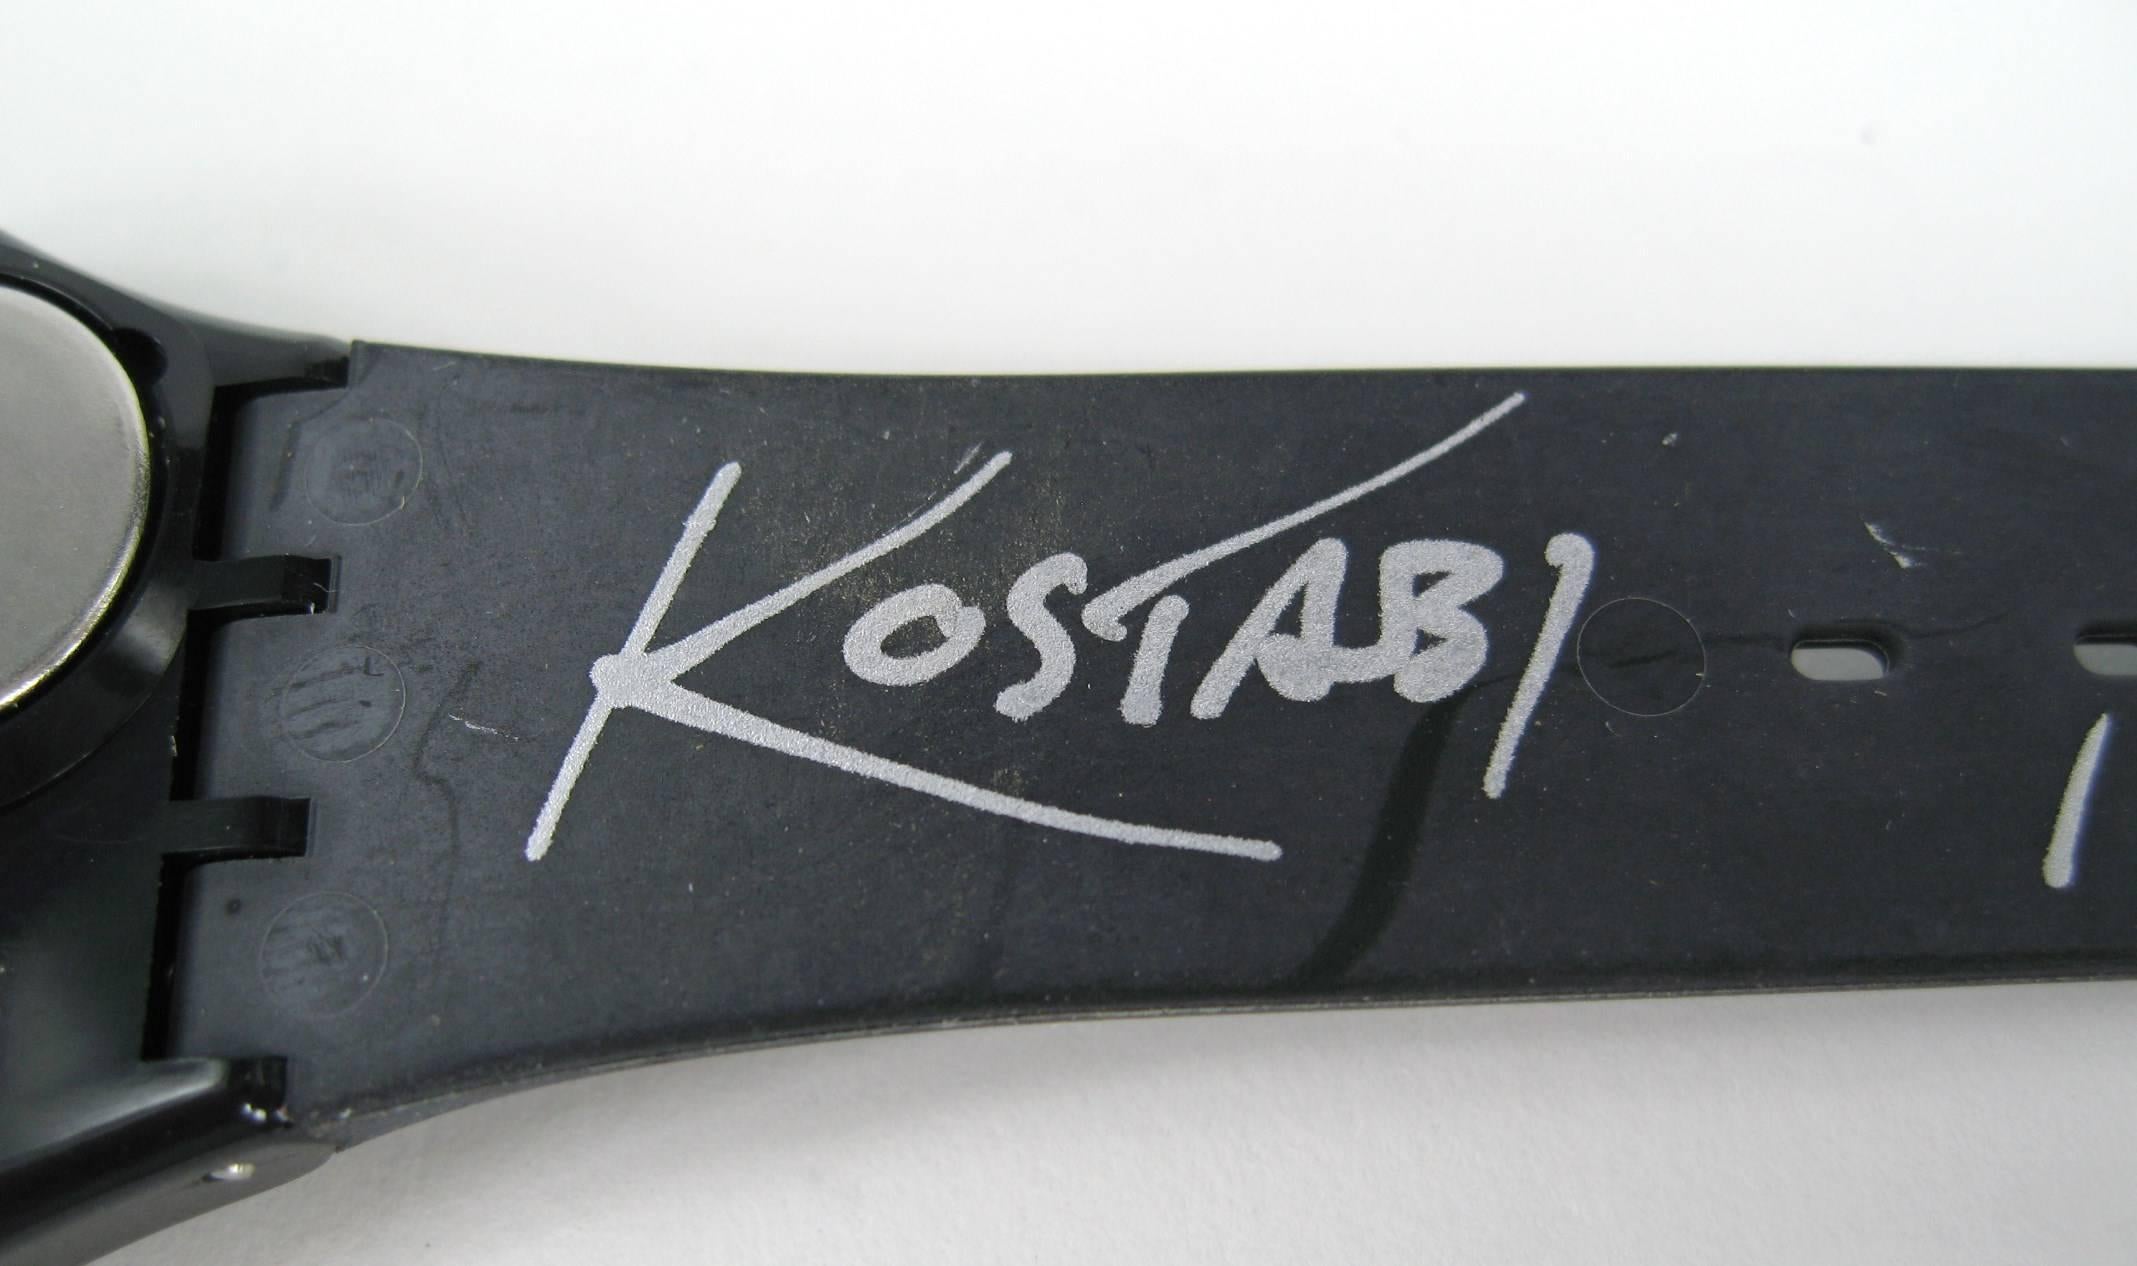  Swatch Twelve Apostles  Watch Hand Signed by Kostabi 1995 New, Never Worn  In New Condition For Sale In Wallkill, NY